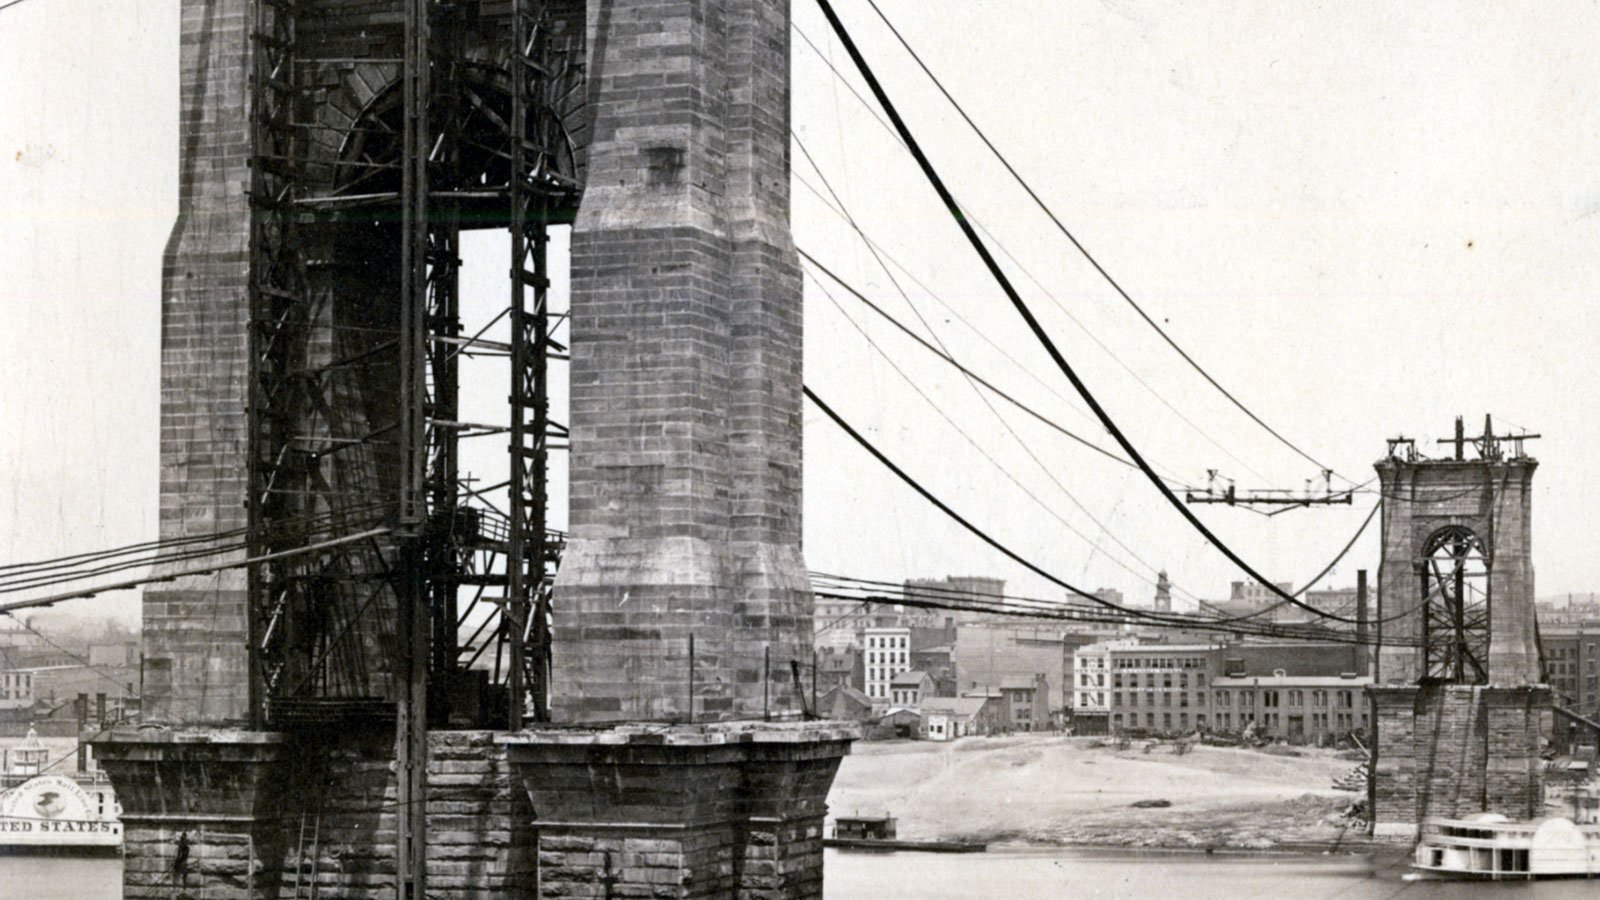 1866: View of cable making between the towers of the Covington and Cincinnati Bridge